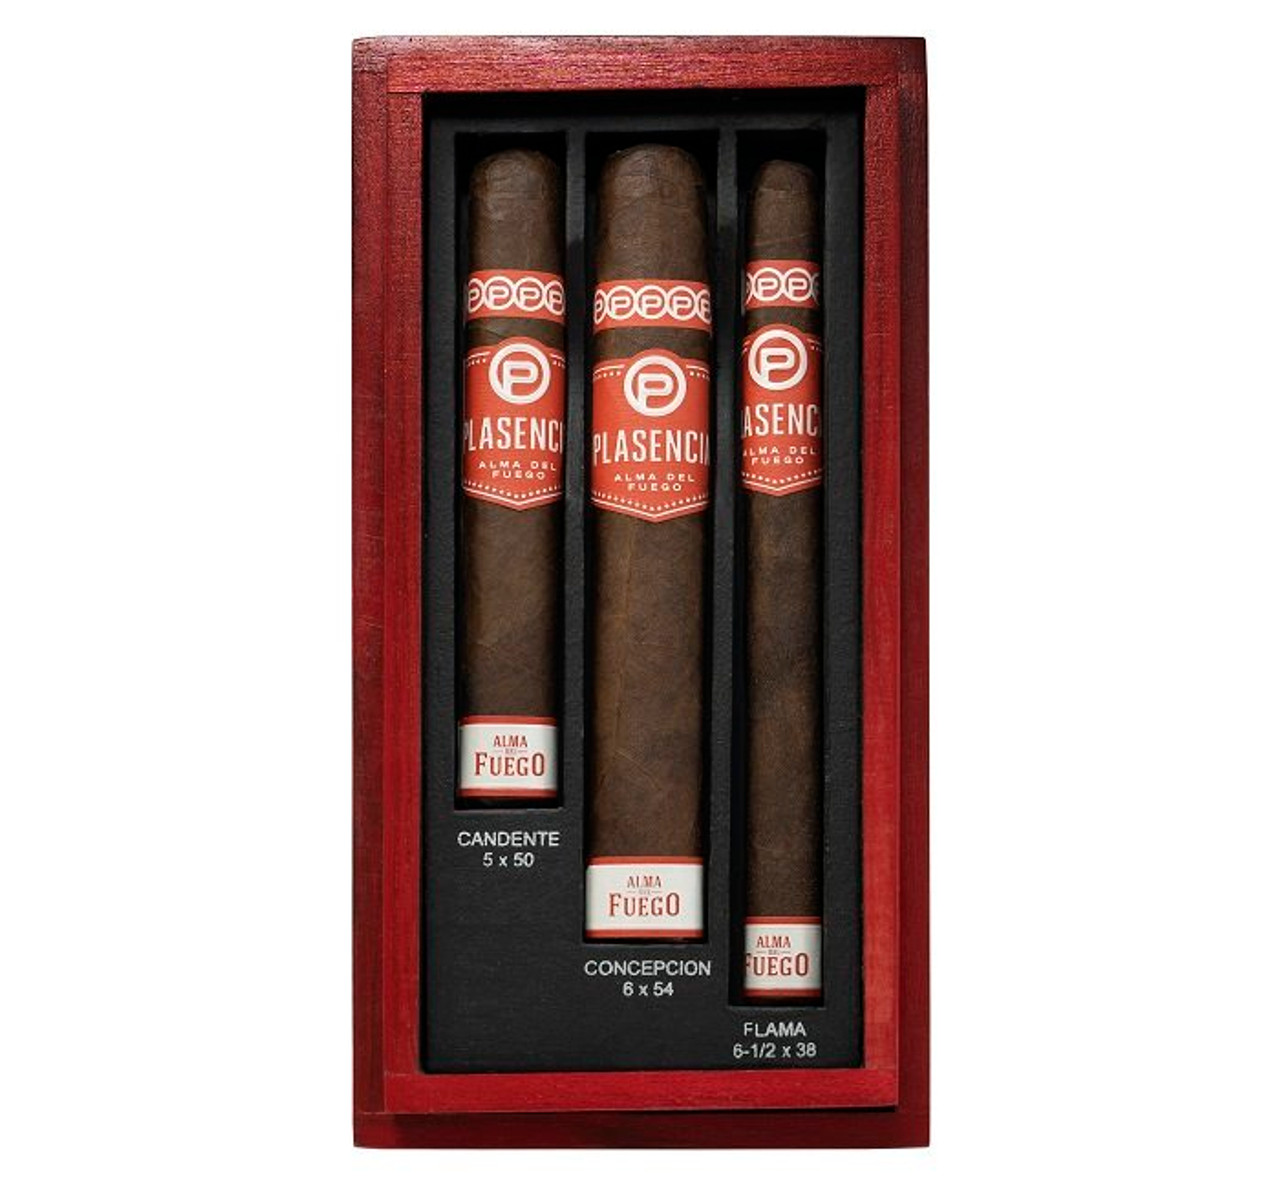 Plasencia Alma del Fuego 3 pack is a GREAT gift idea and this price includes FREE shipping from cigarsamplers.com